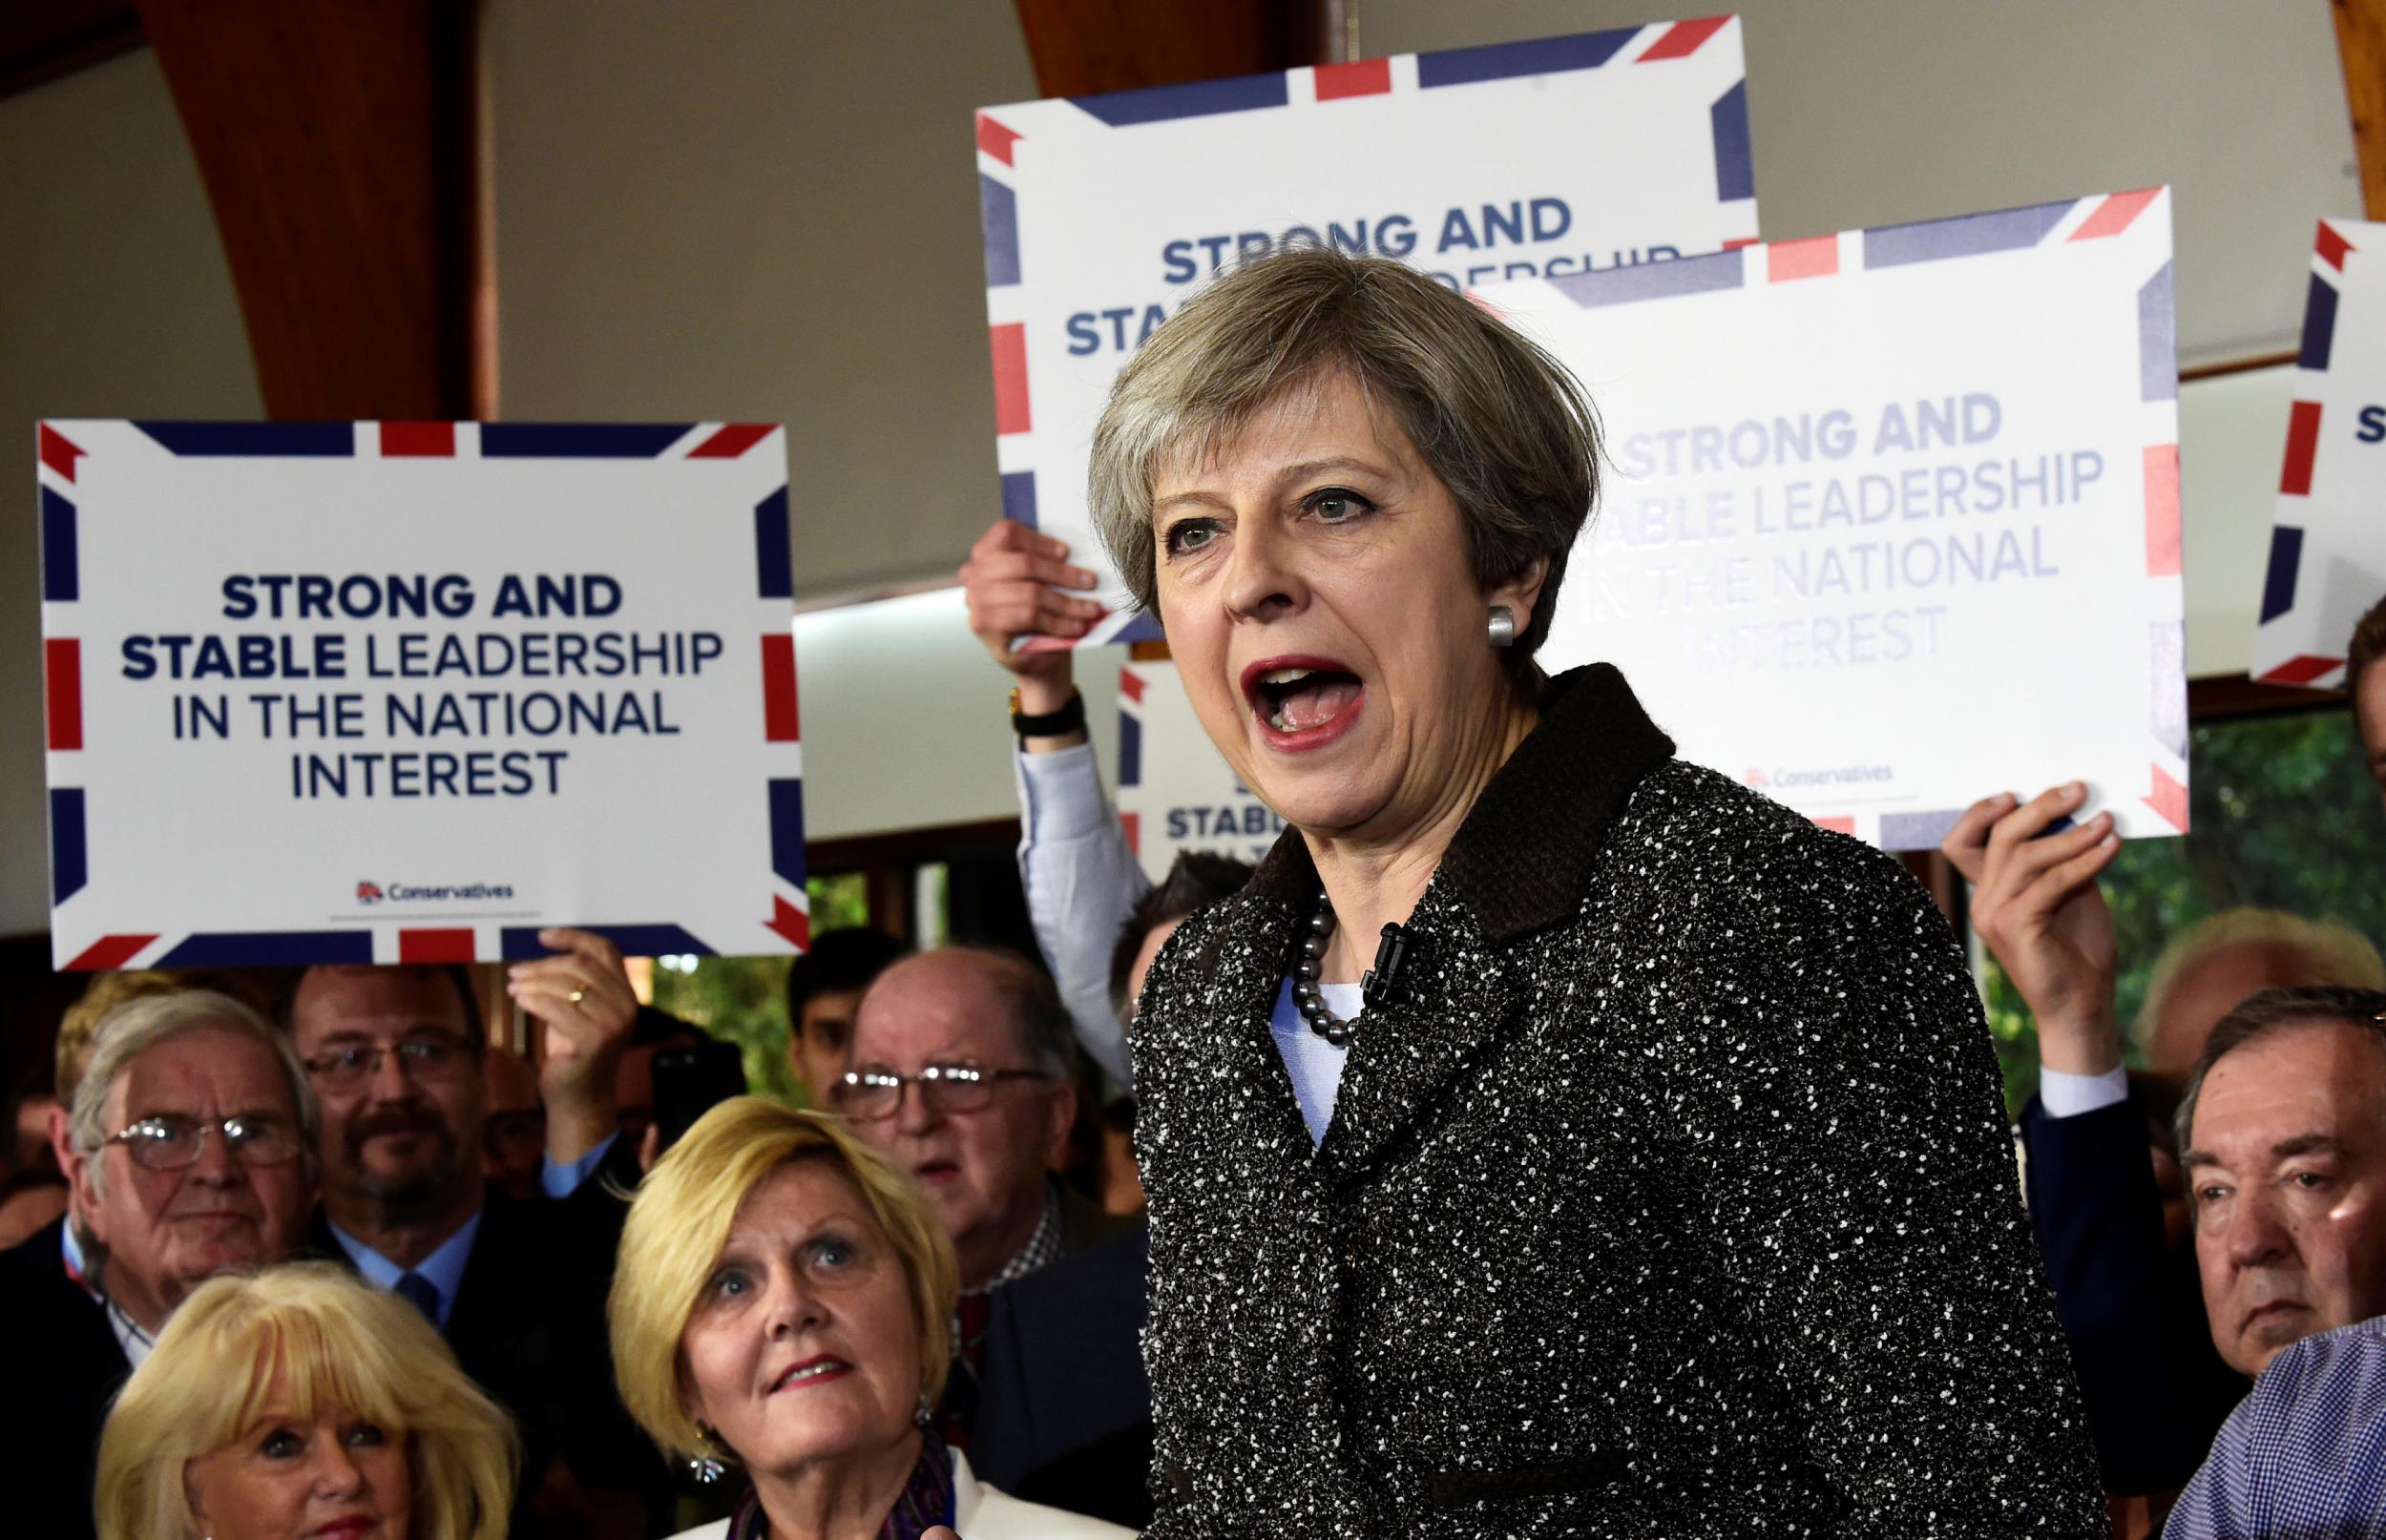 Six times Theresa May gave the people of Wales the choice between her ‘strong and stable leadership’ and a supposed coalition of chaos